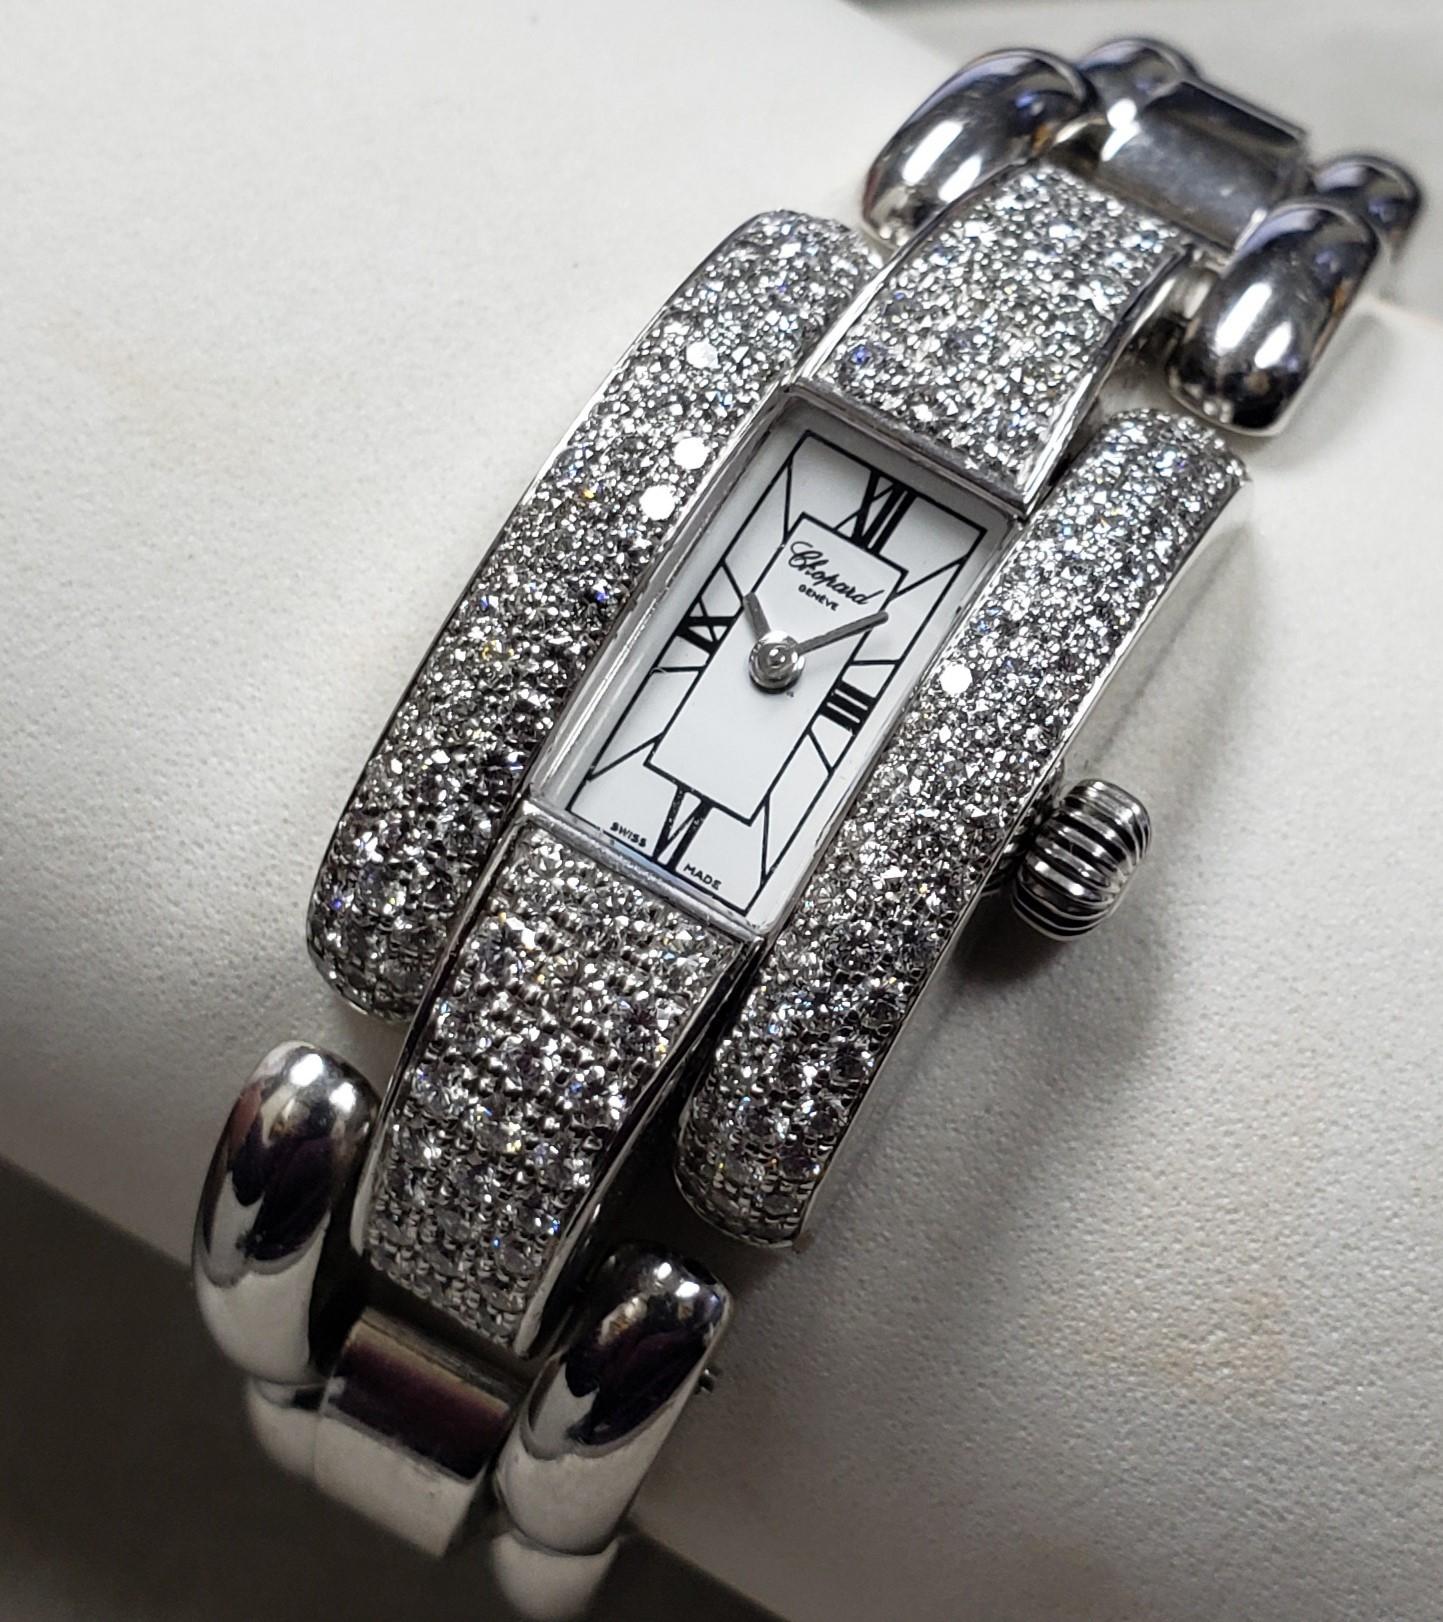 100% authentic Chopard La Strada 533667 ladies Diamond watch 18K White Gold set with collection quality Round Brilliant cut natural diamonds - well matched in color and clarity 3.50CT total weight. 

Watch features:

Size: 41x21MM (41x18MM